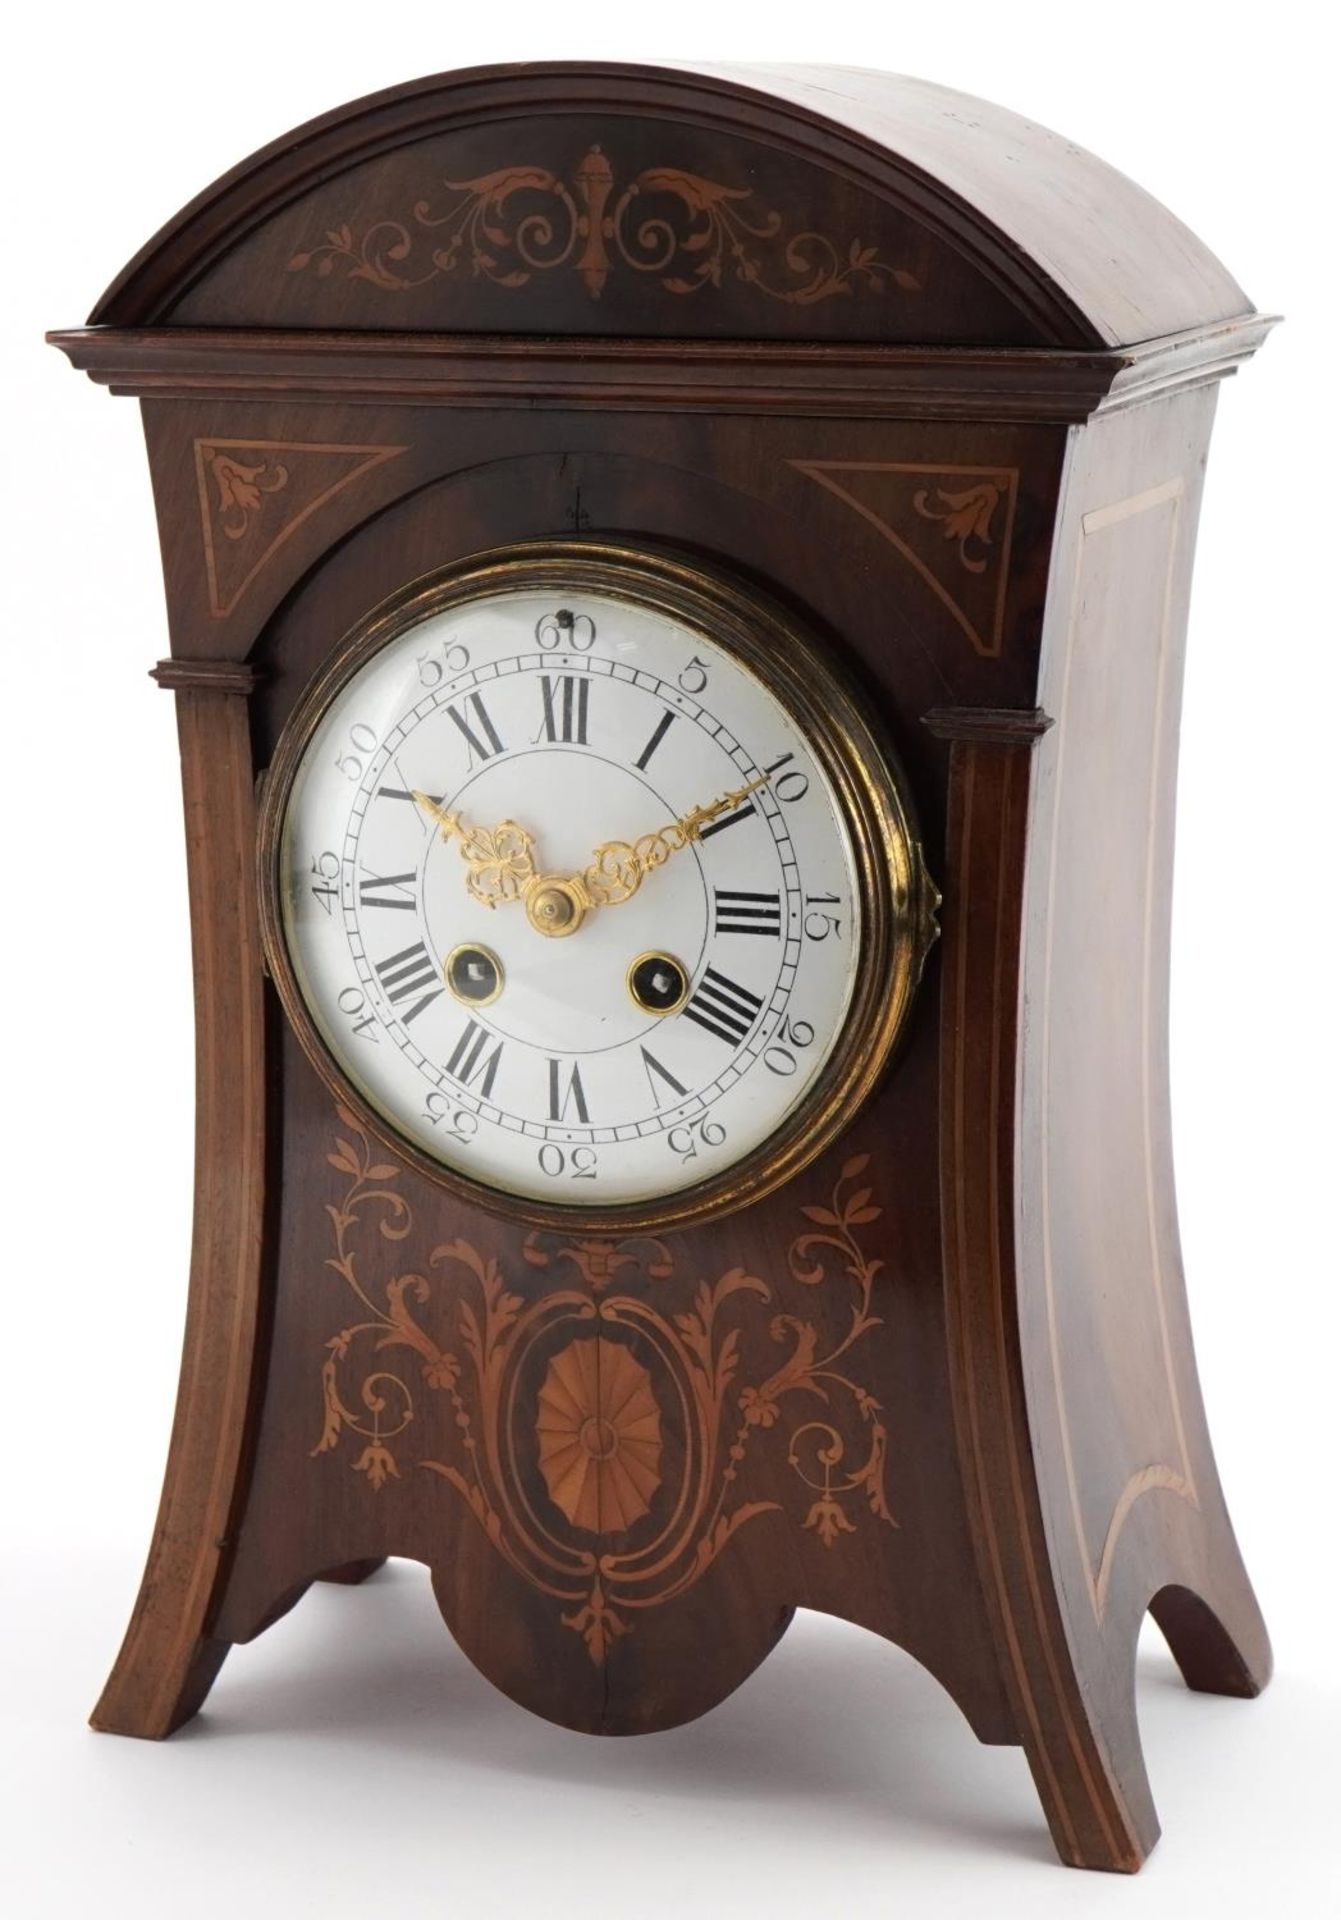 19th century inlaid mahogany mantle clock with enamelled dial, striking on a gong, having Roman